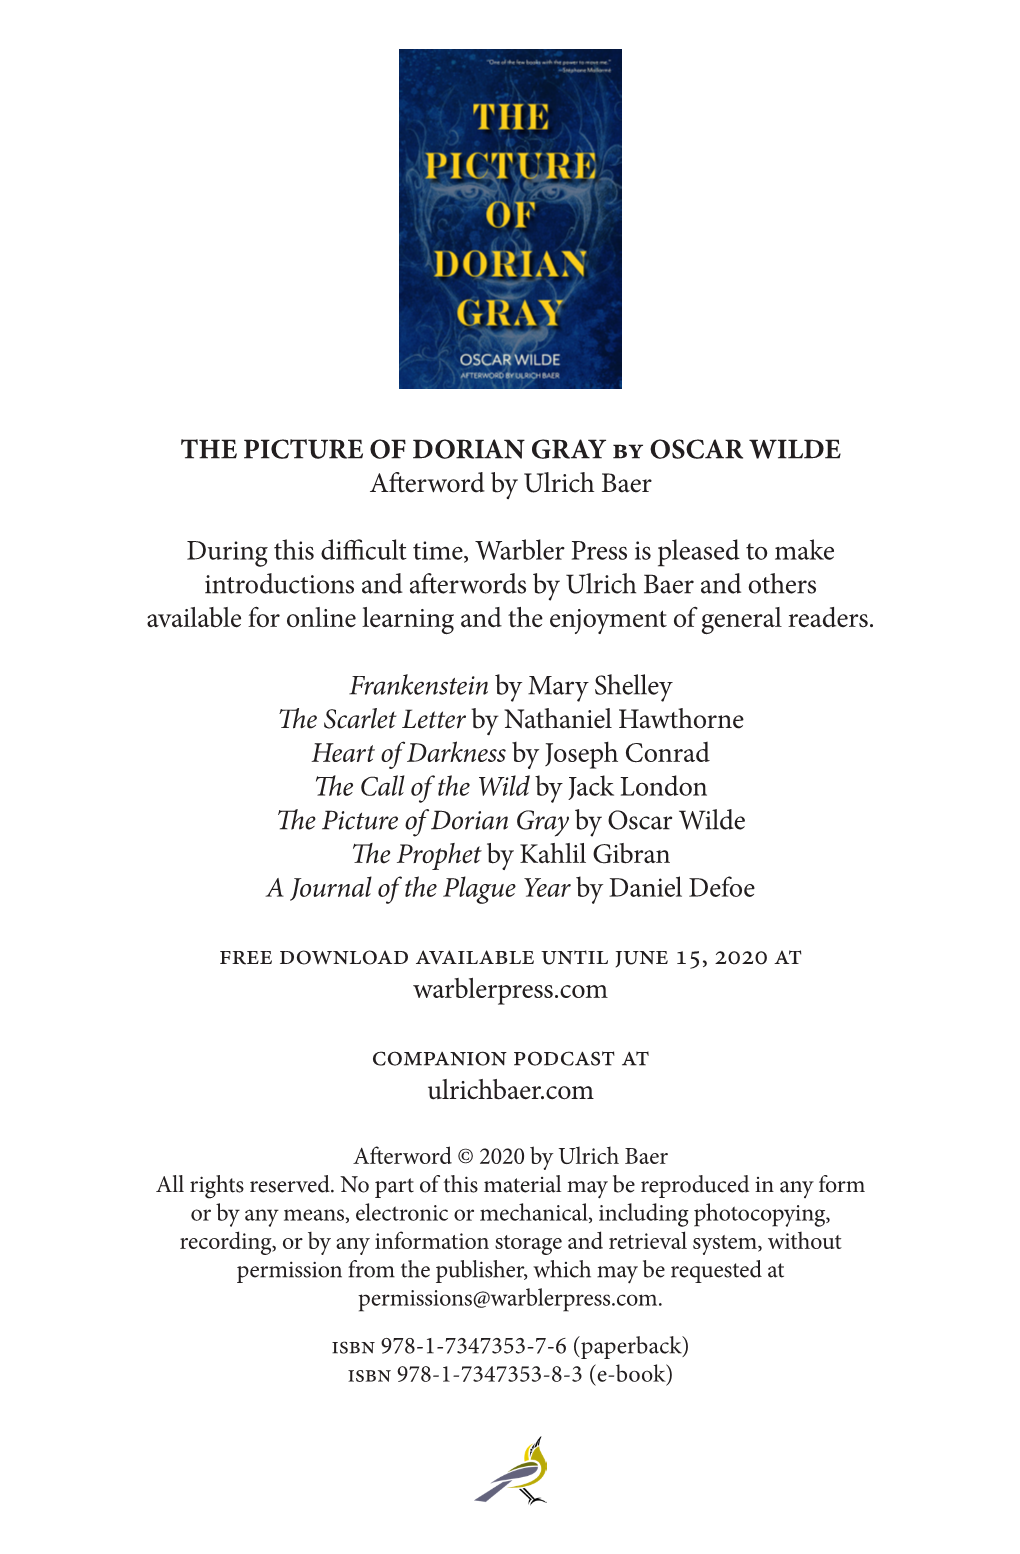 THE PICTURE of DORIAN GRAY by OSCAR WILDE Afterword by Ulrich Baer